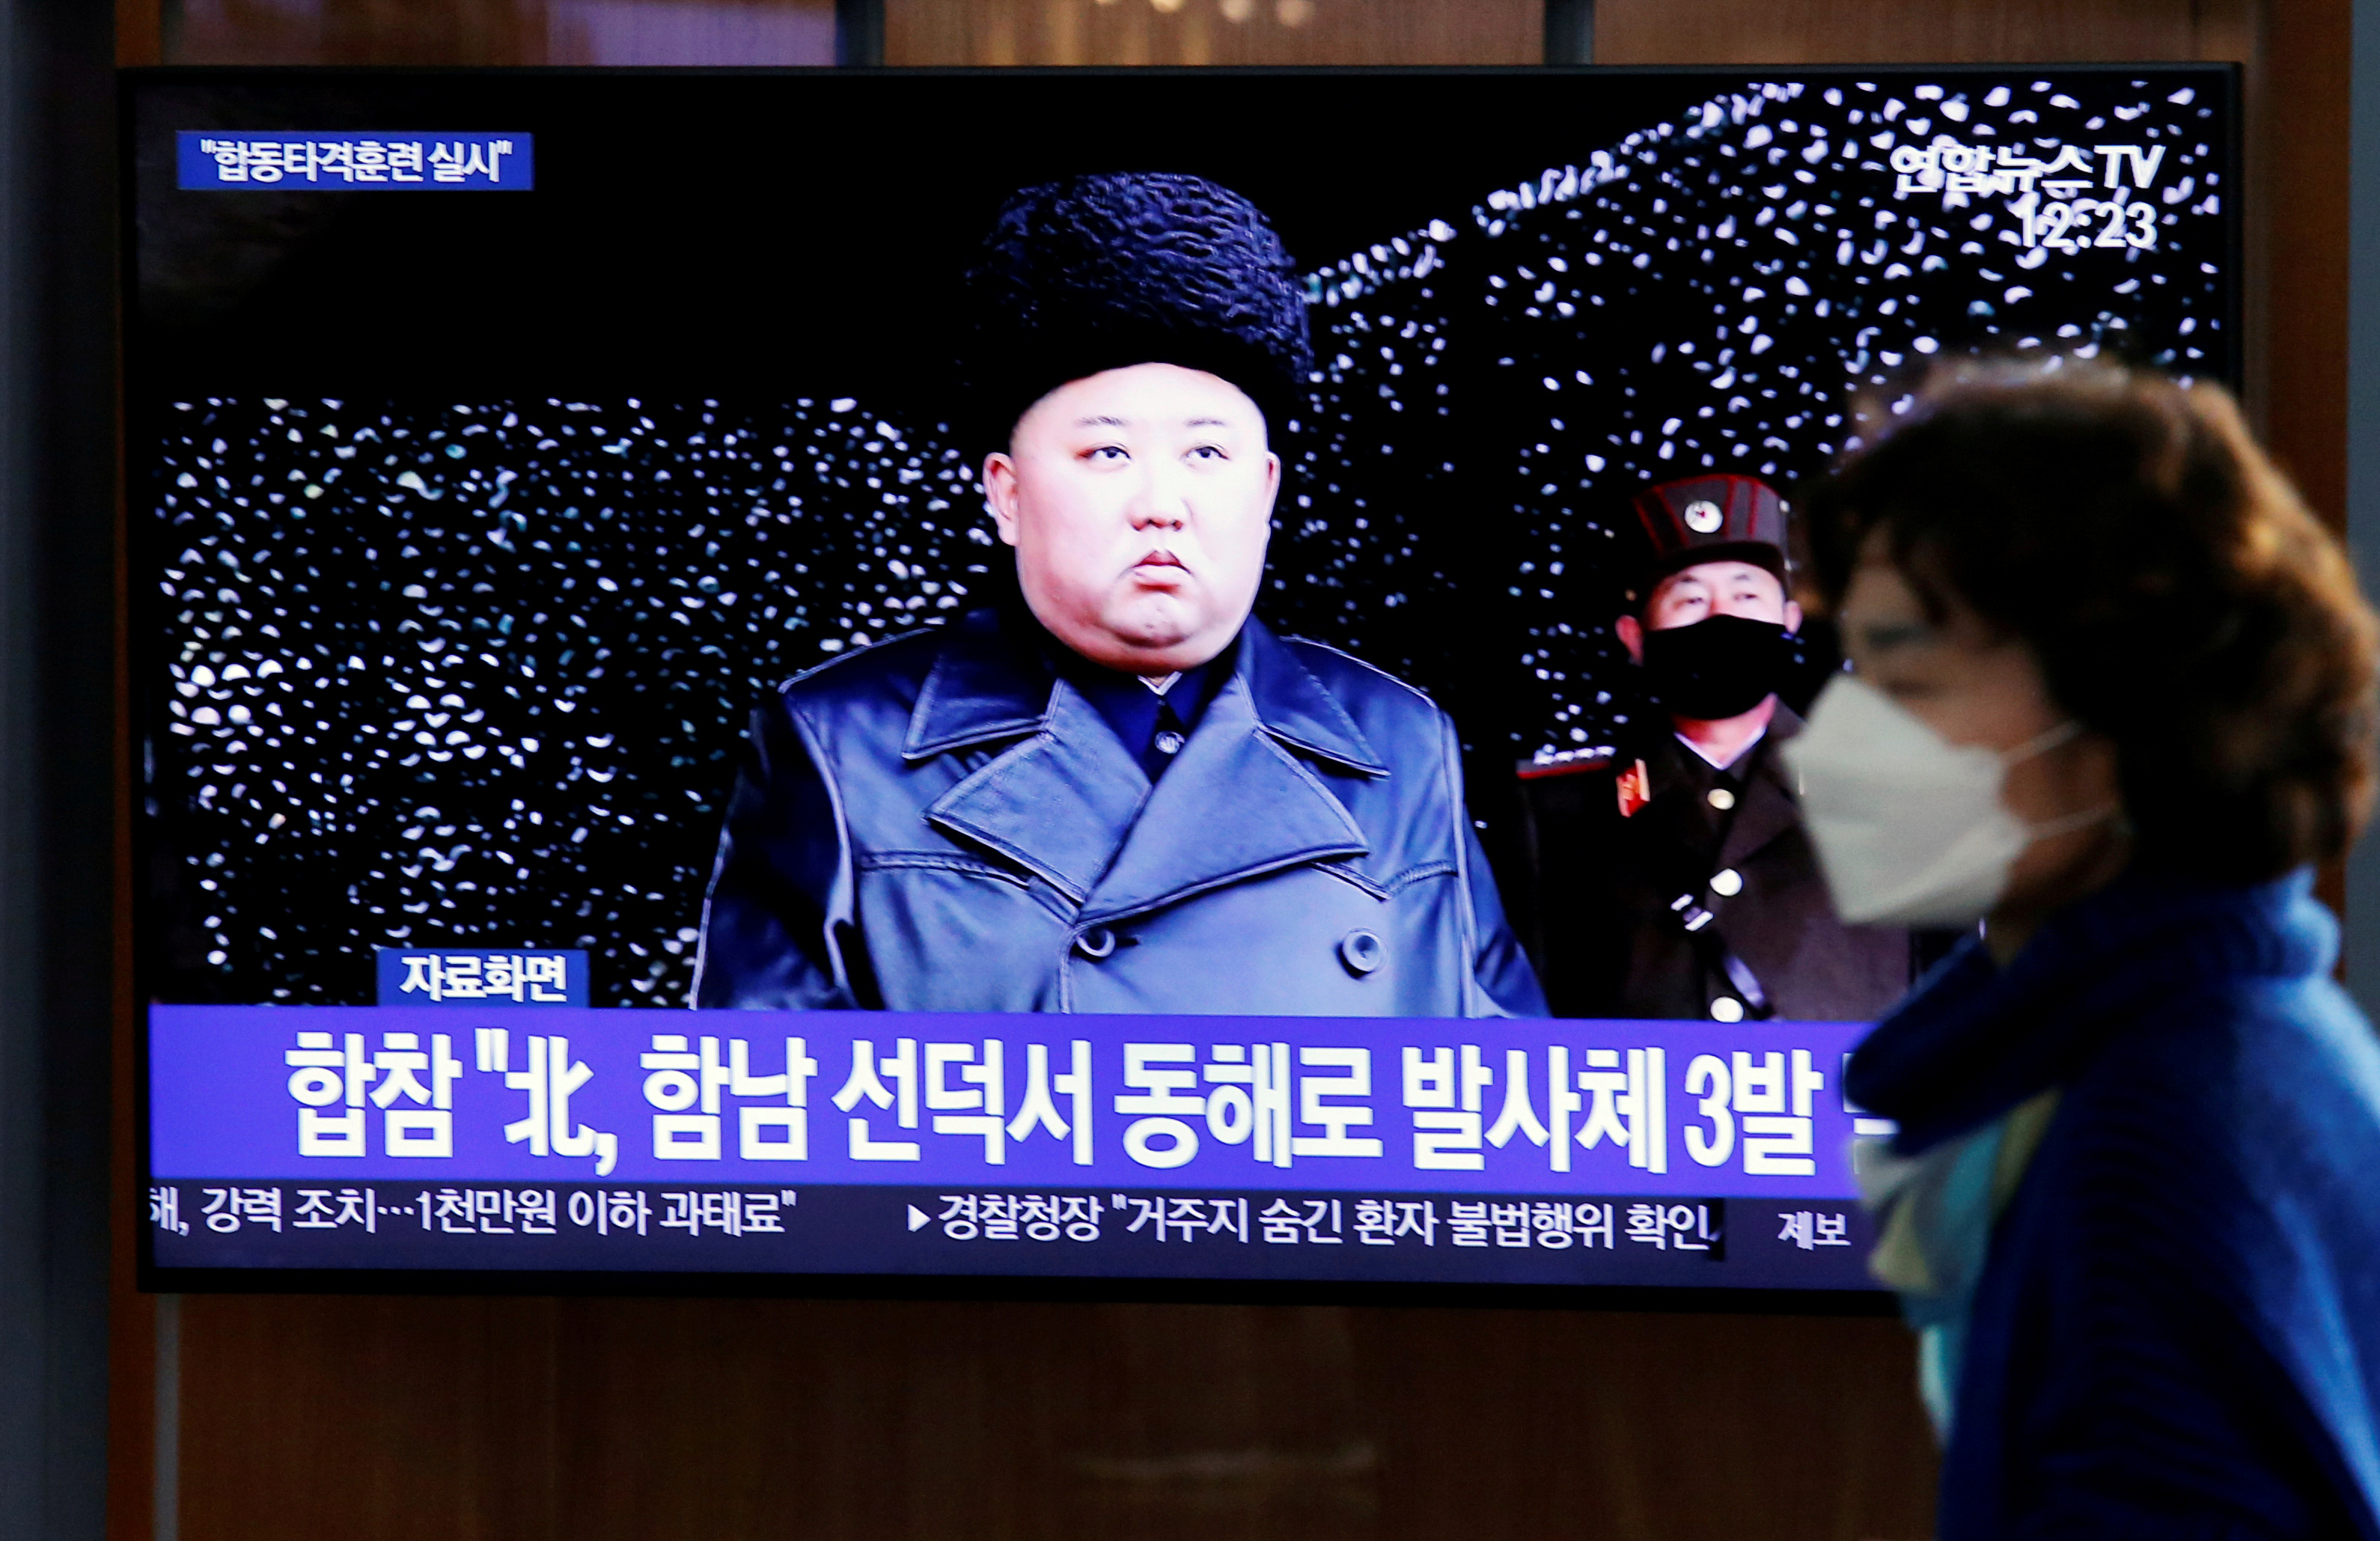 A woman walks past a TV broadcasting file footage for a news report on North Korea firing an unidentified projectile, in Seoul